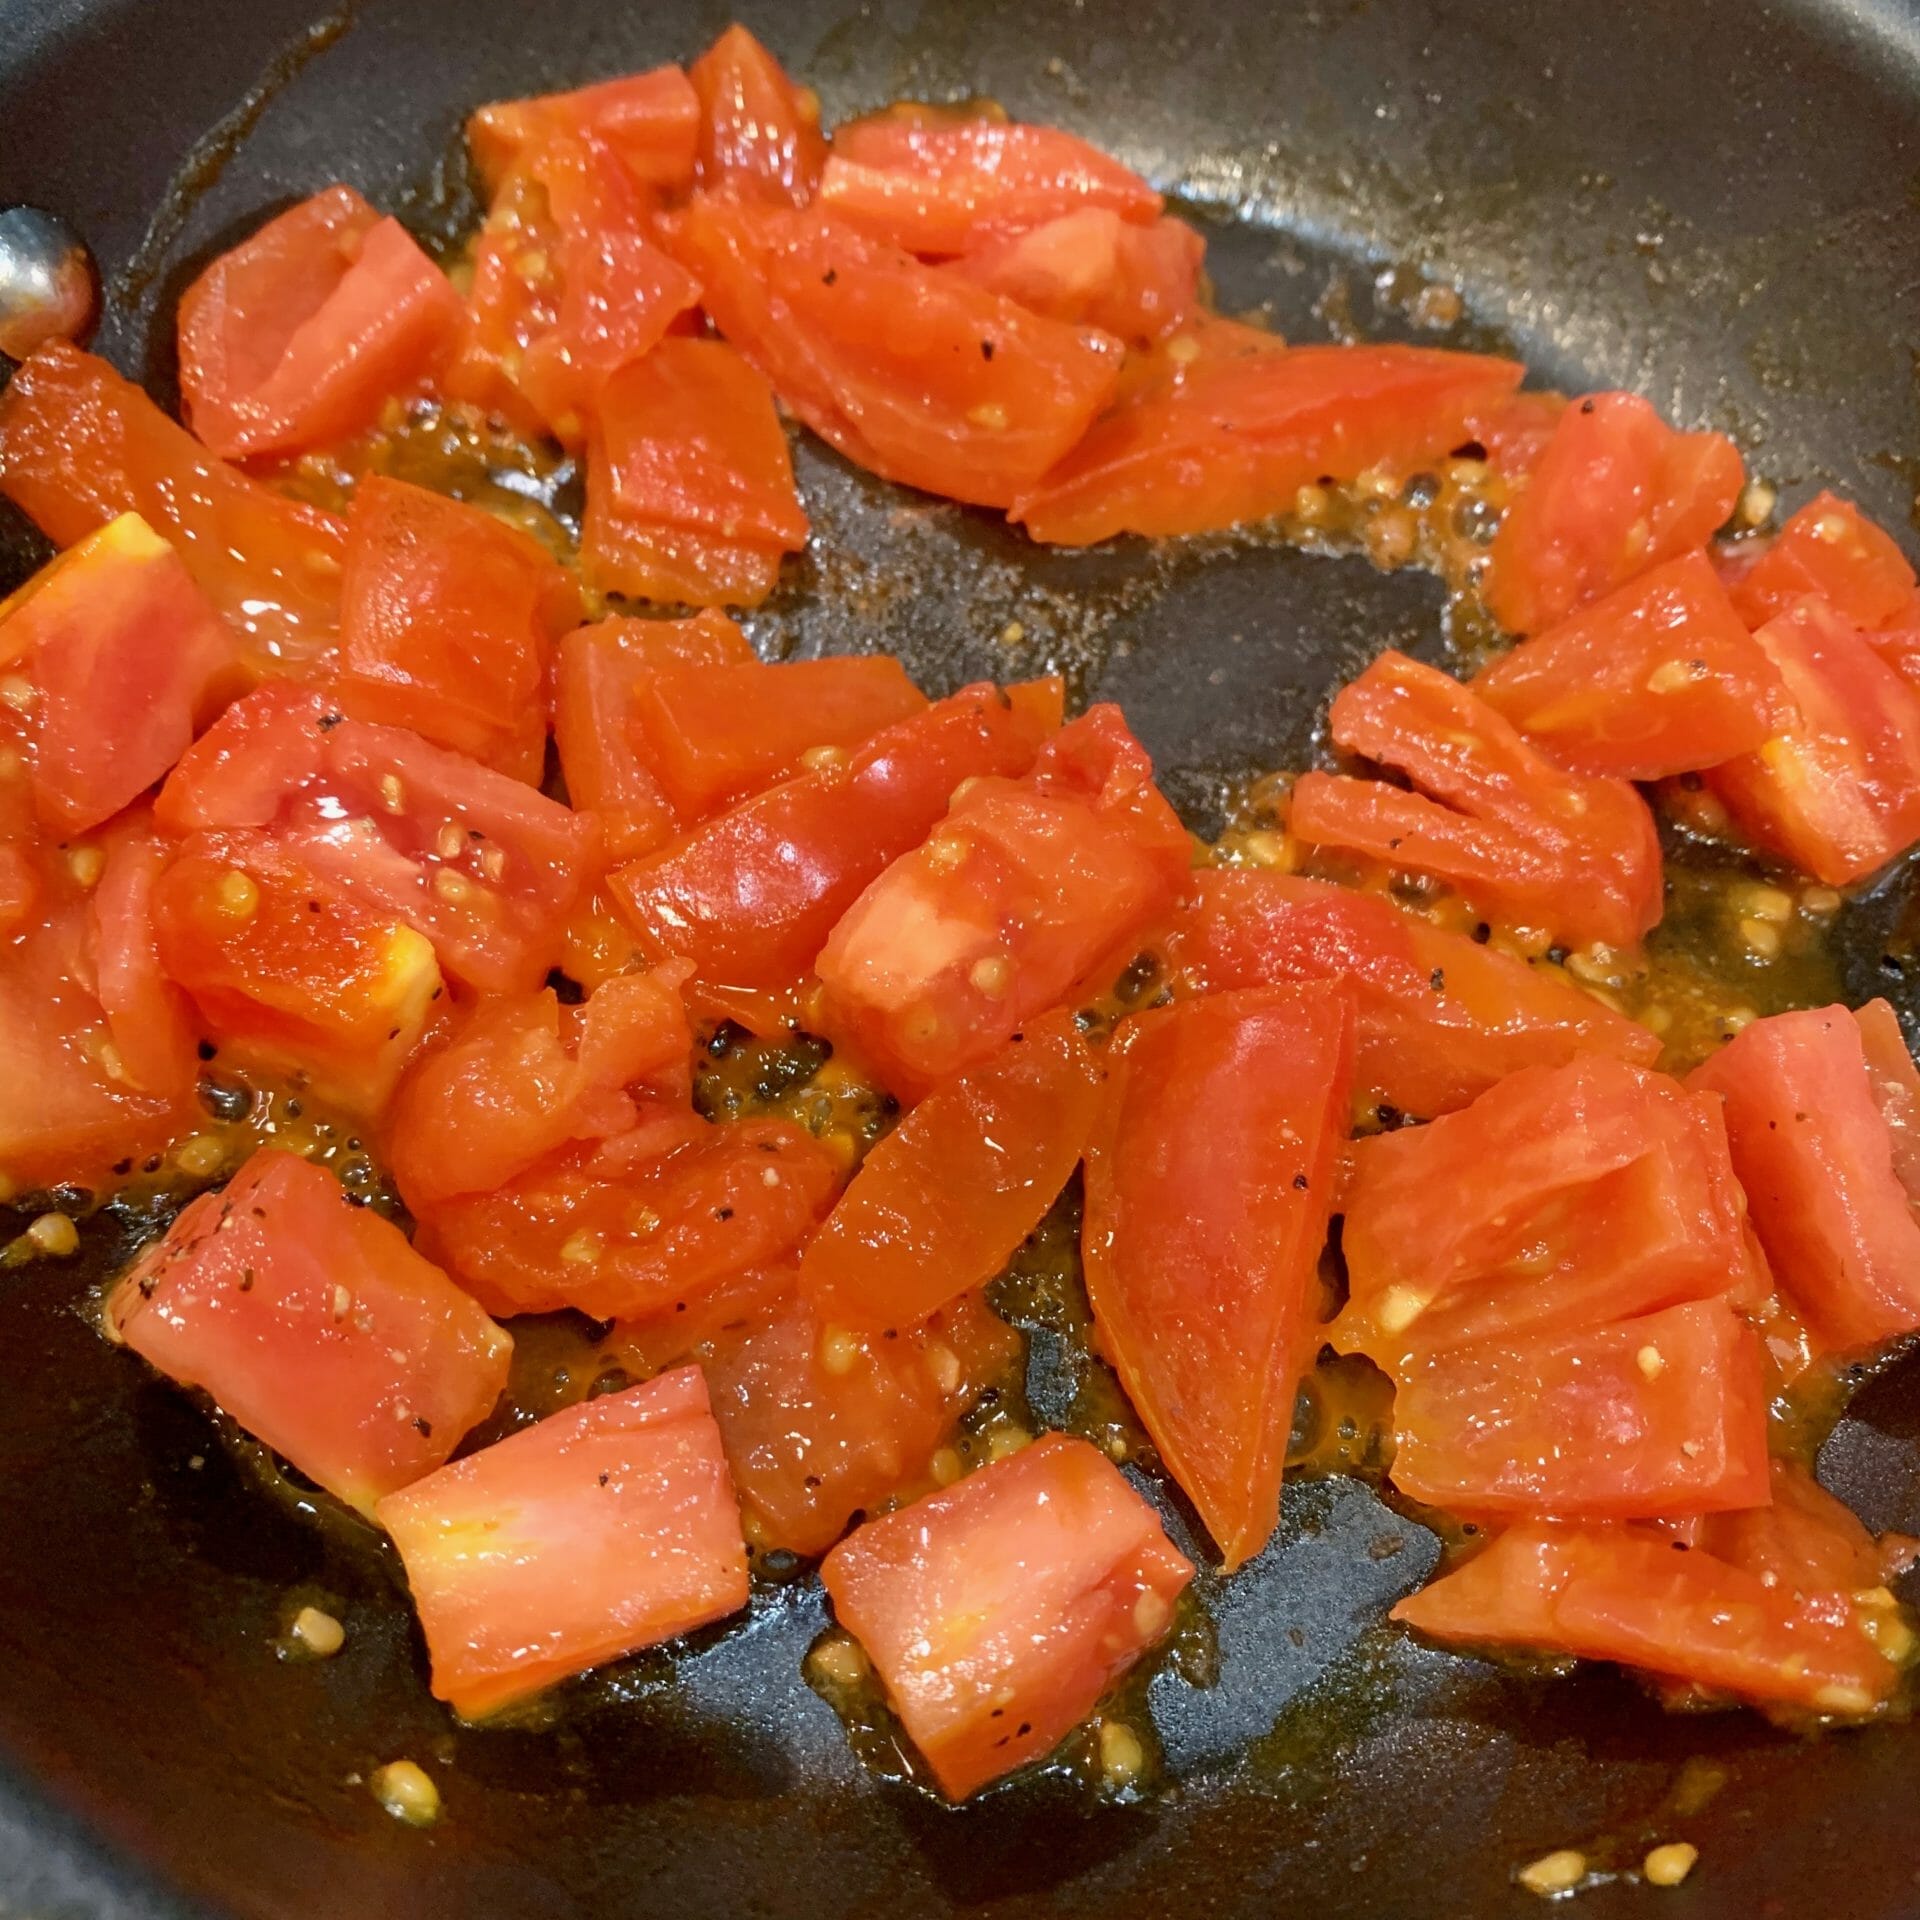 Fried, diced tomatoes